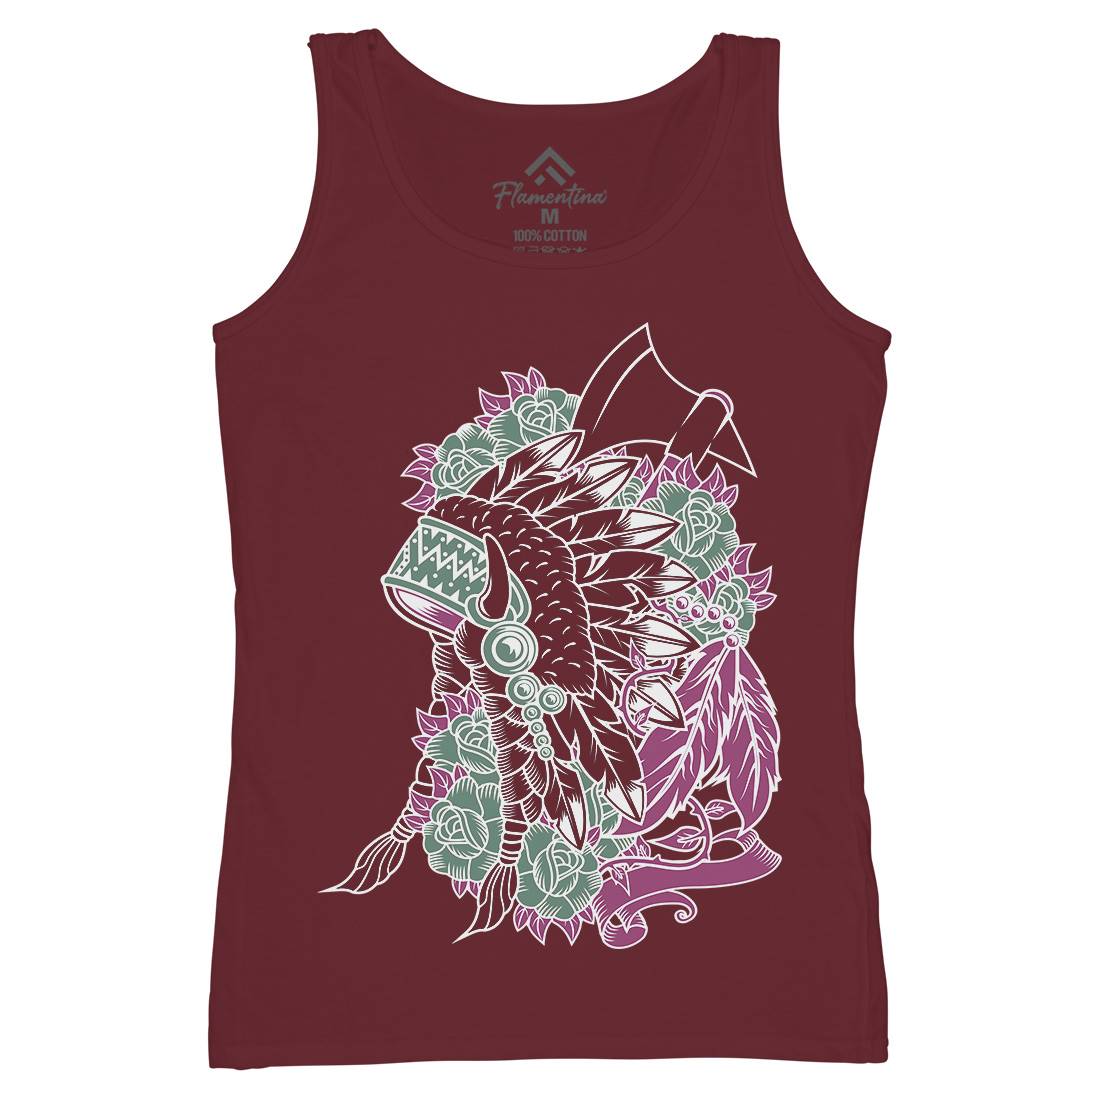 Indian Womens Organic Tank Top Vest Motorcycles A071